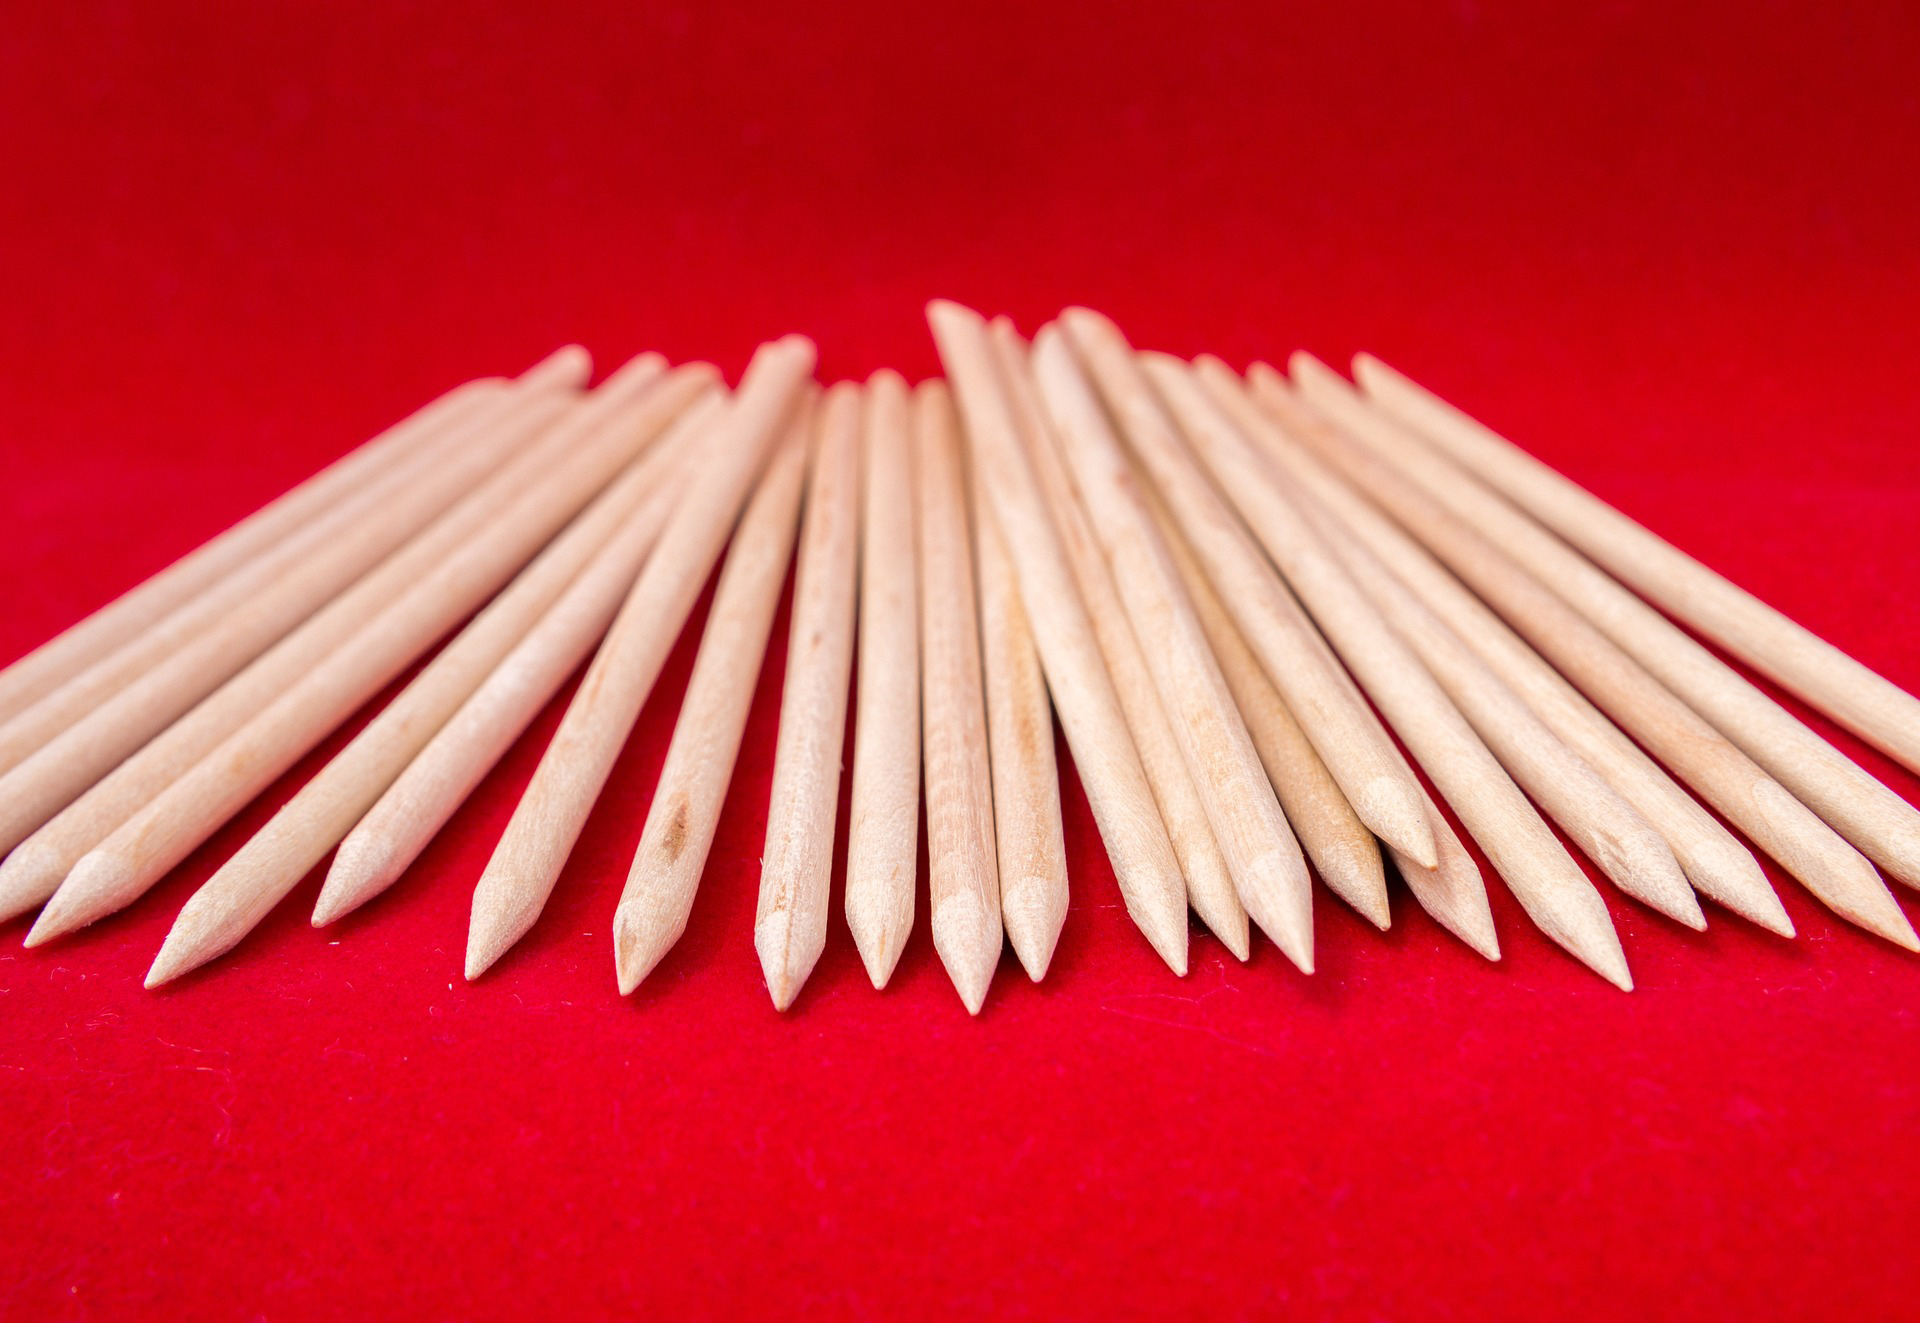 South Korea Begs People To Stop Eating Fried Toothpicks… Yes, Seriously